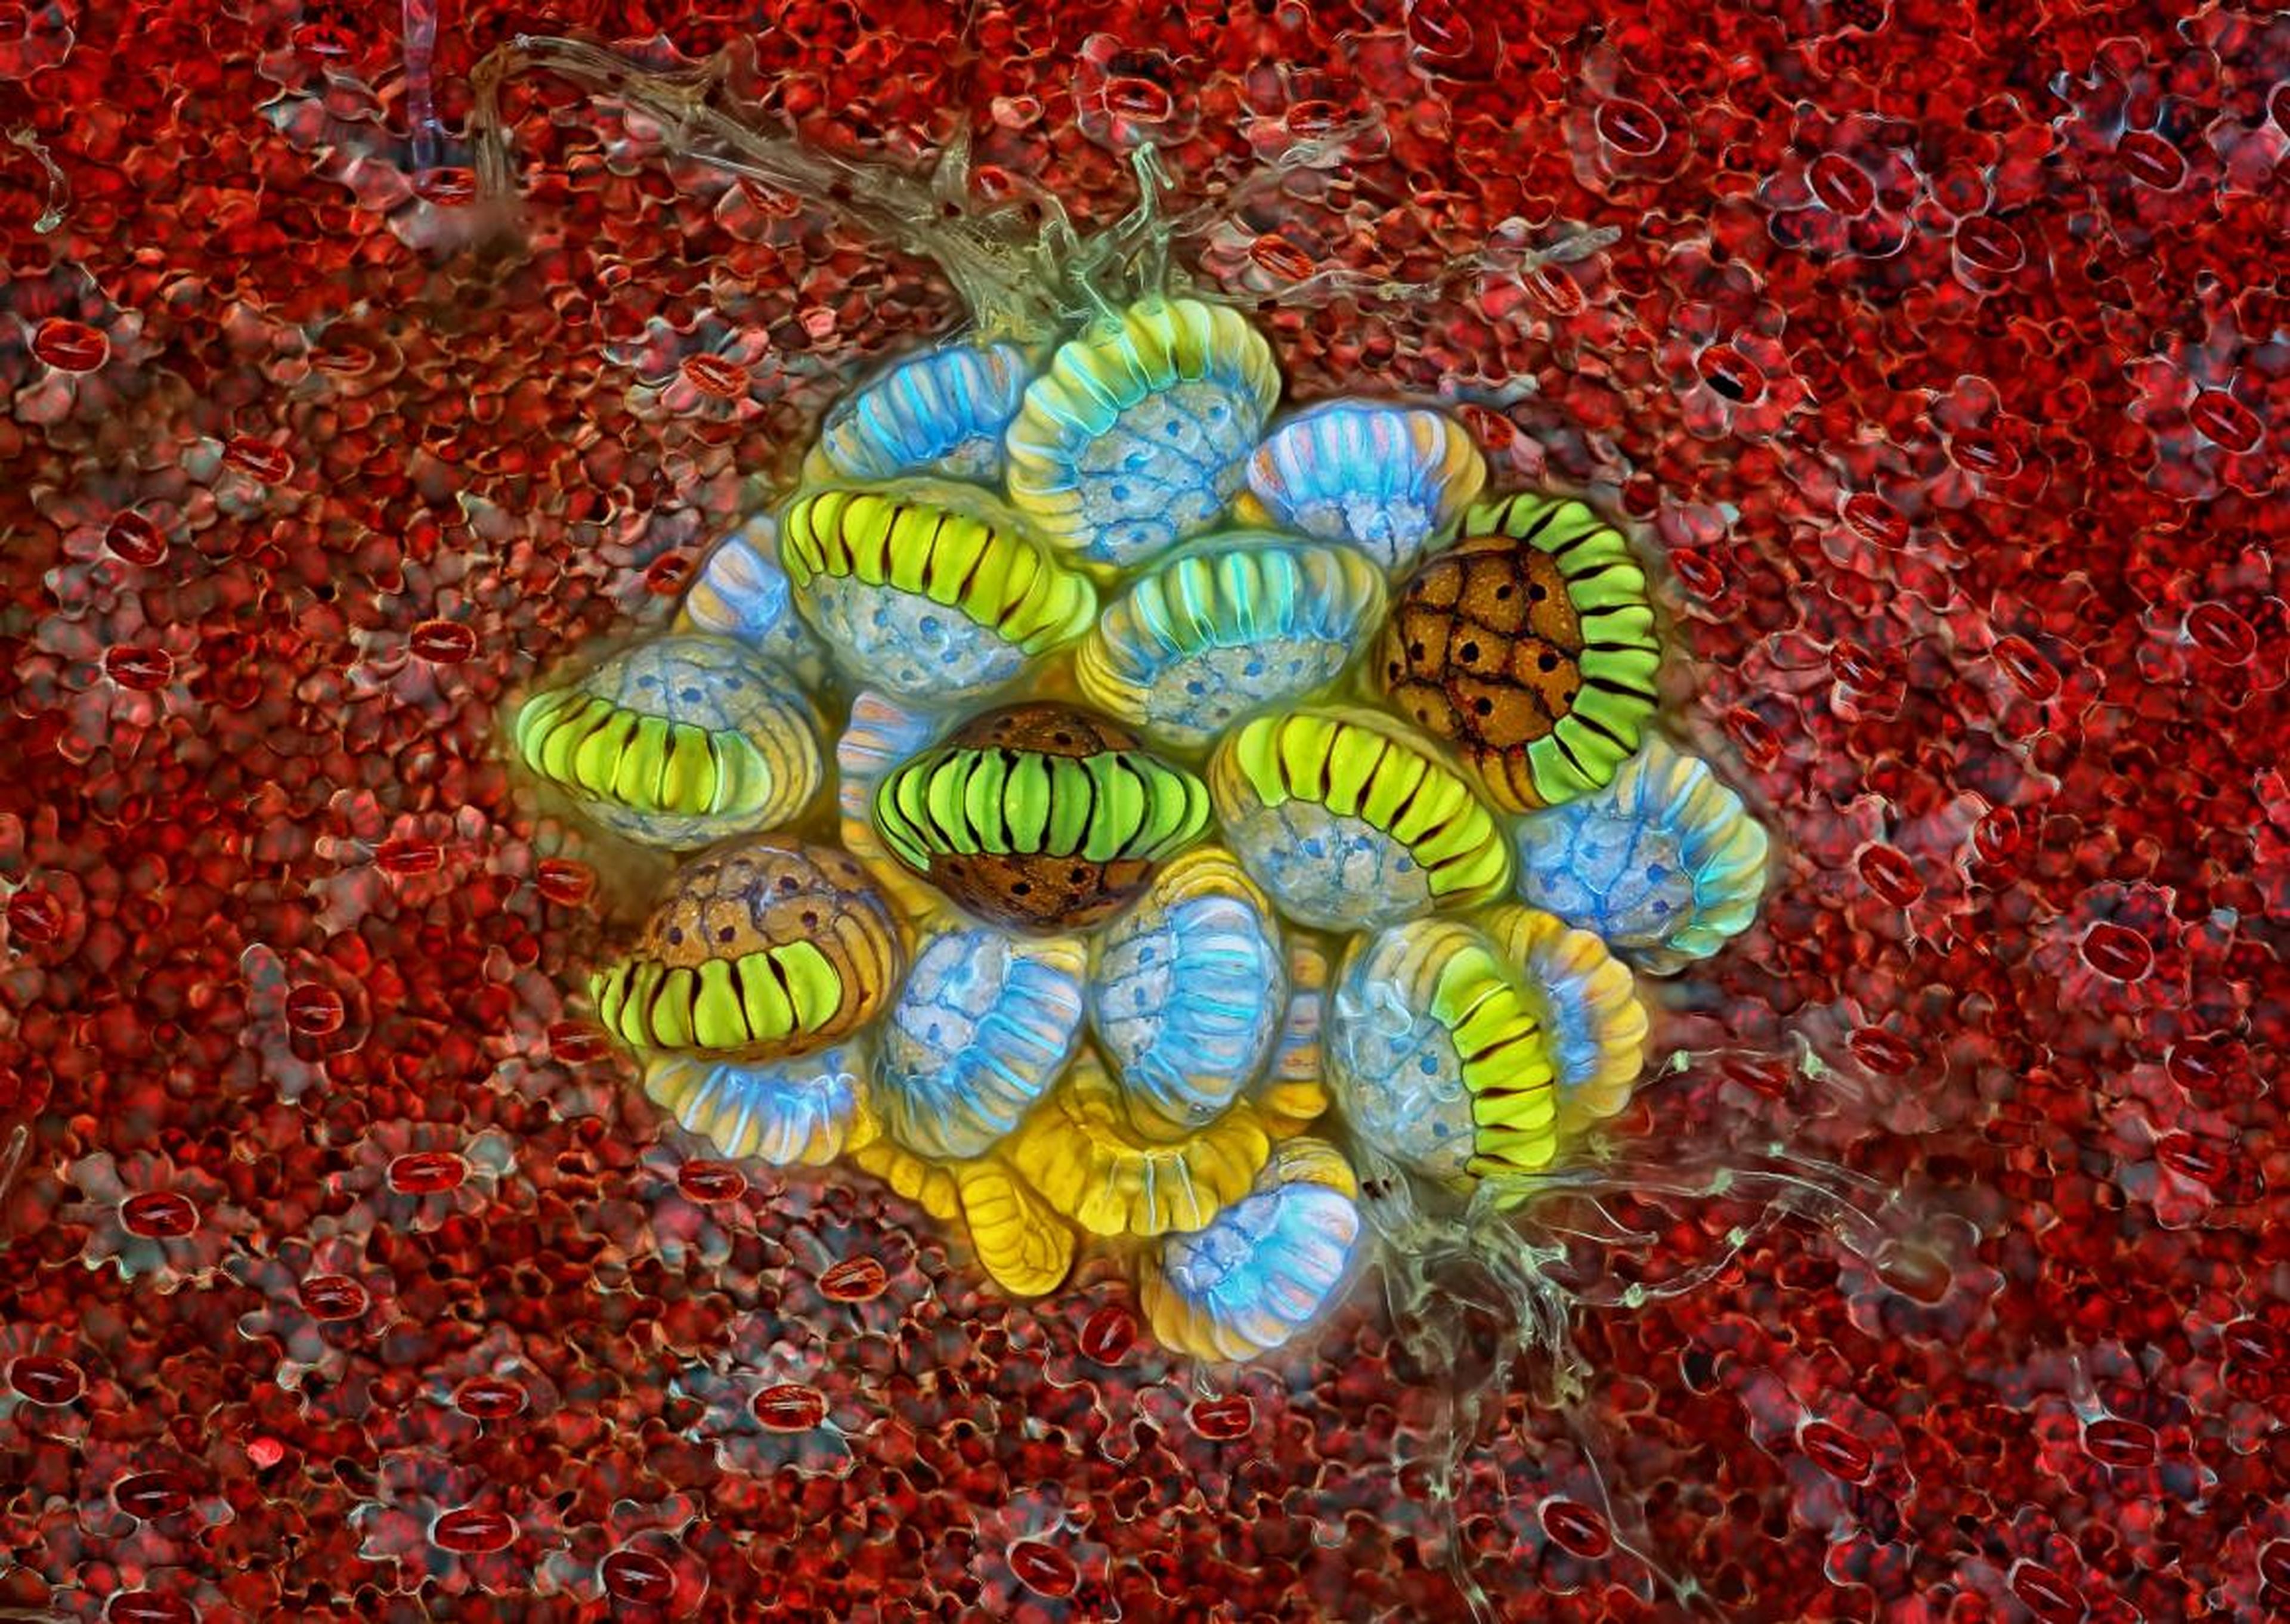 This cluster of reproductive cells within a fern won second-place.